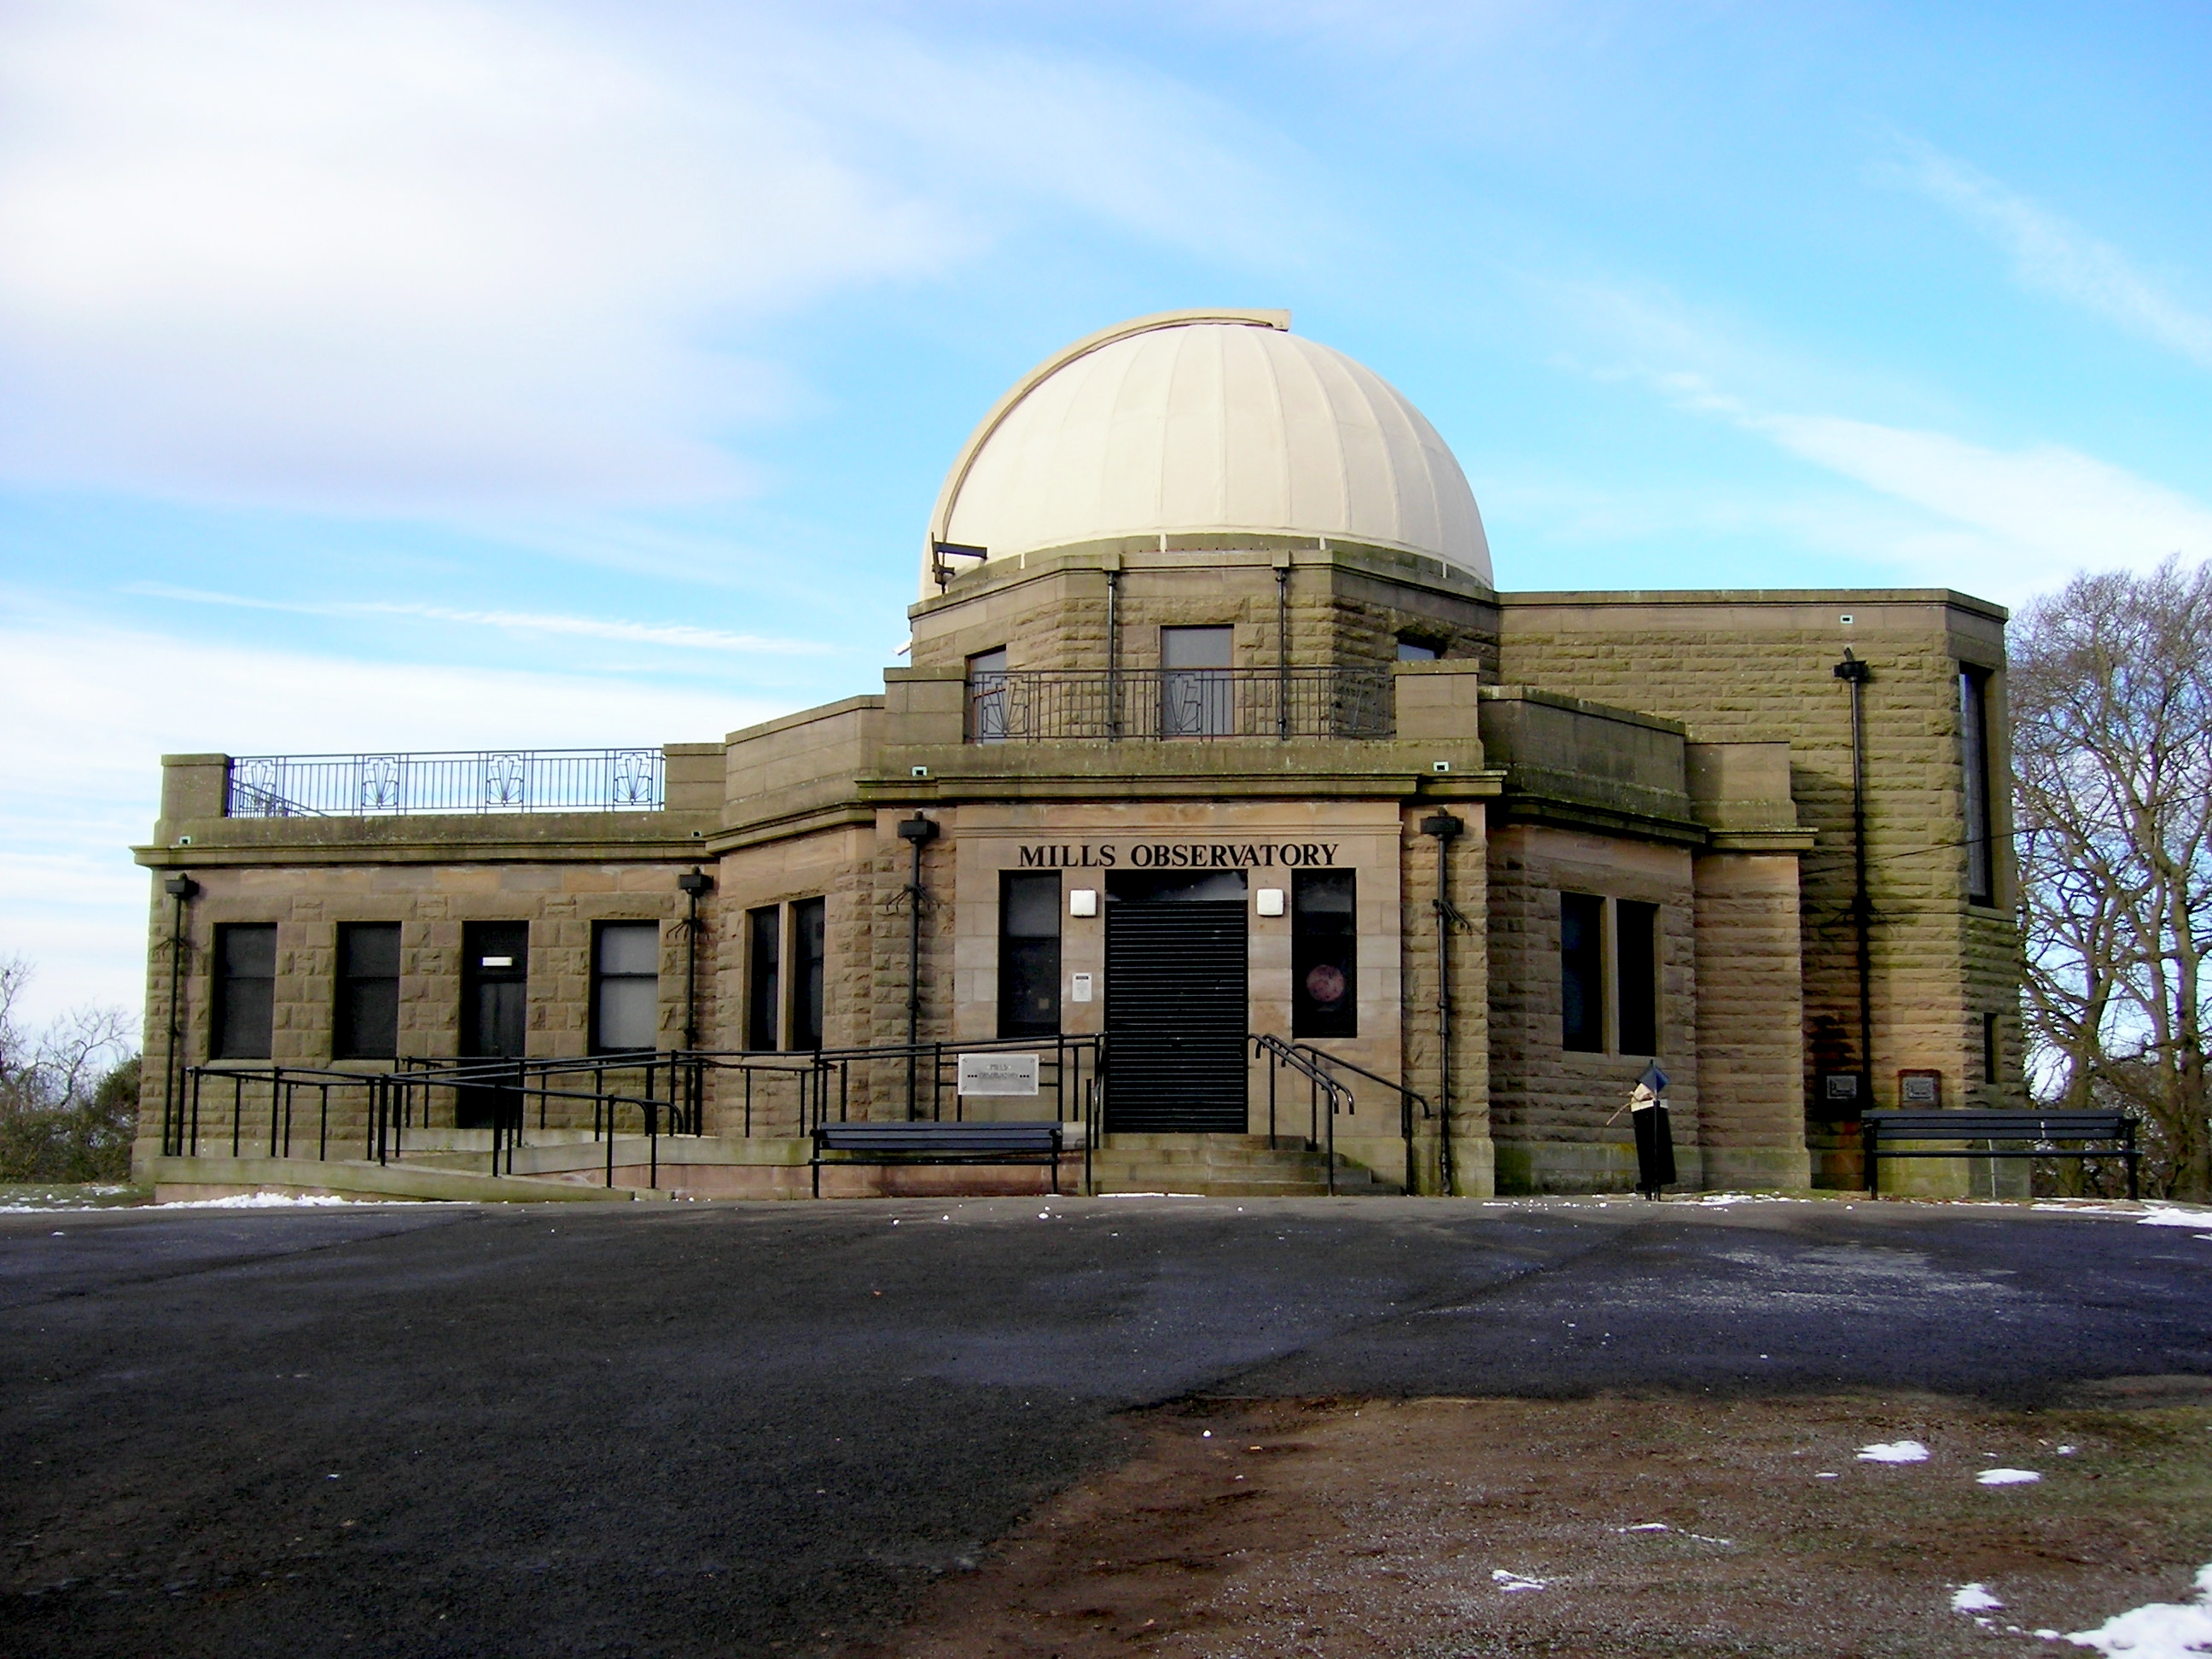 Mills Observatory was built in 1935